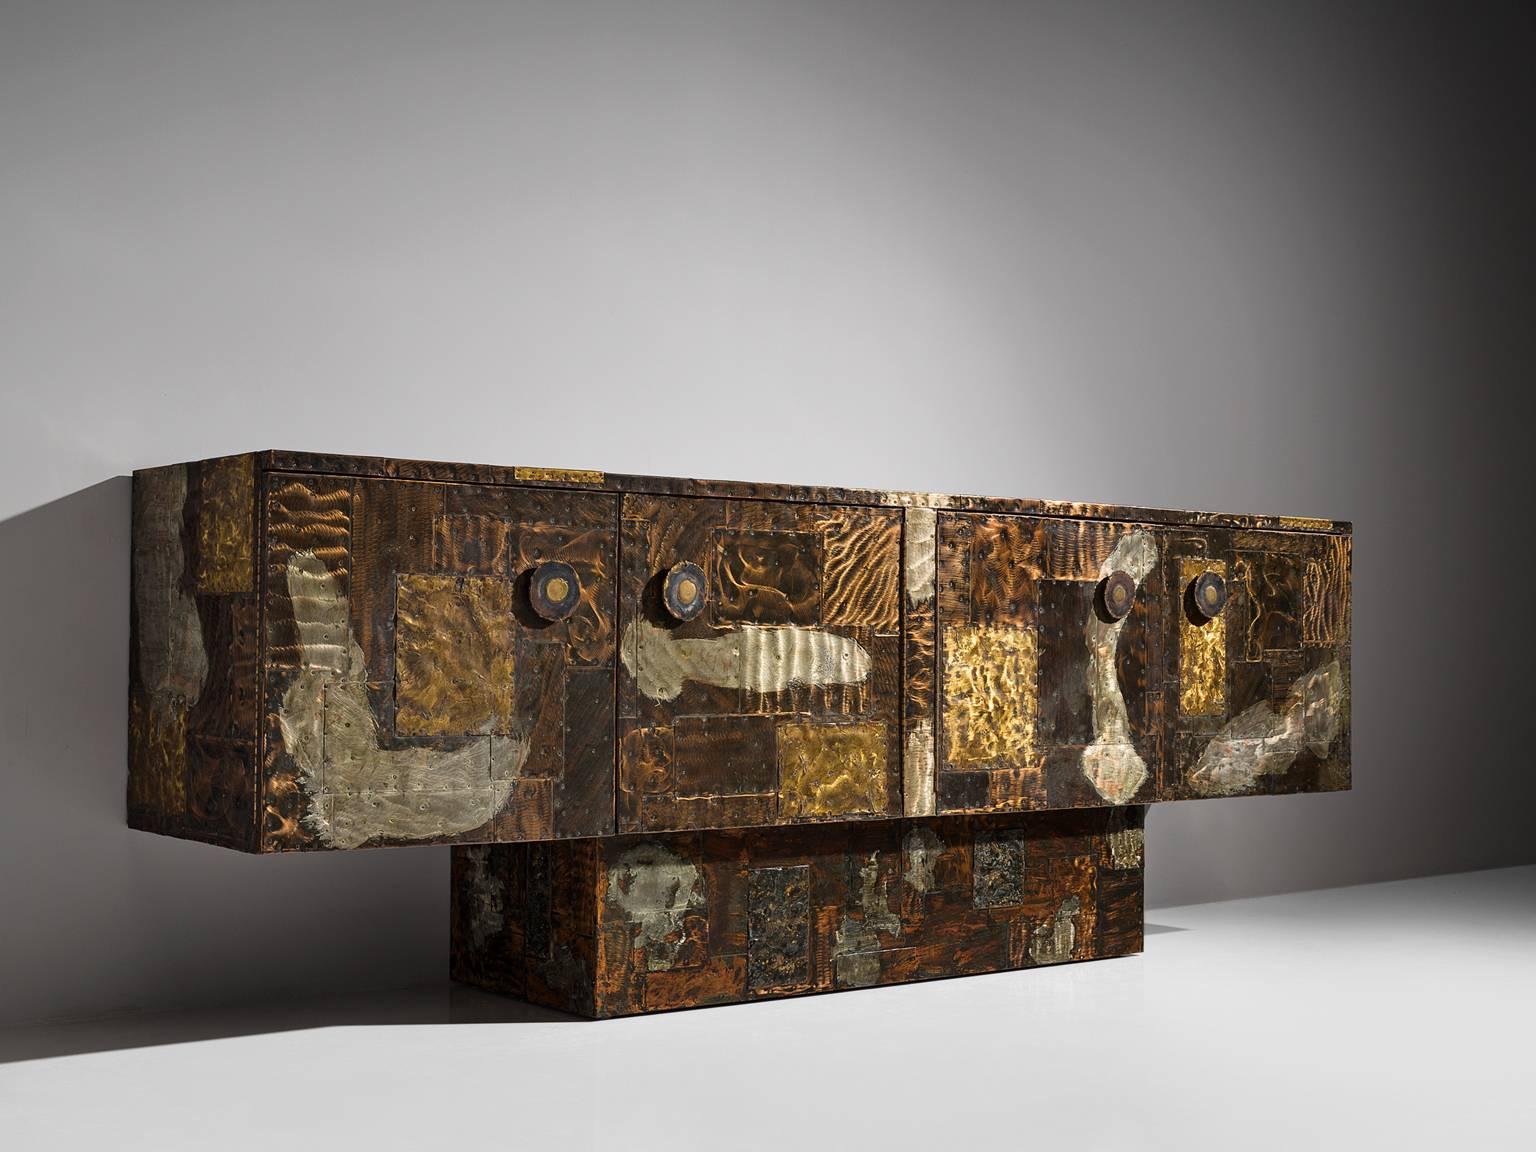 Paul Evans for Directional furniture, Patchwork cabinet, brass, copper, pewter, slate, United States, circa 1968

This pedestal sideboard is designed and produced by Paul Evans. Early in his career, is was already visible that he was interested to